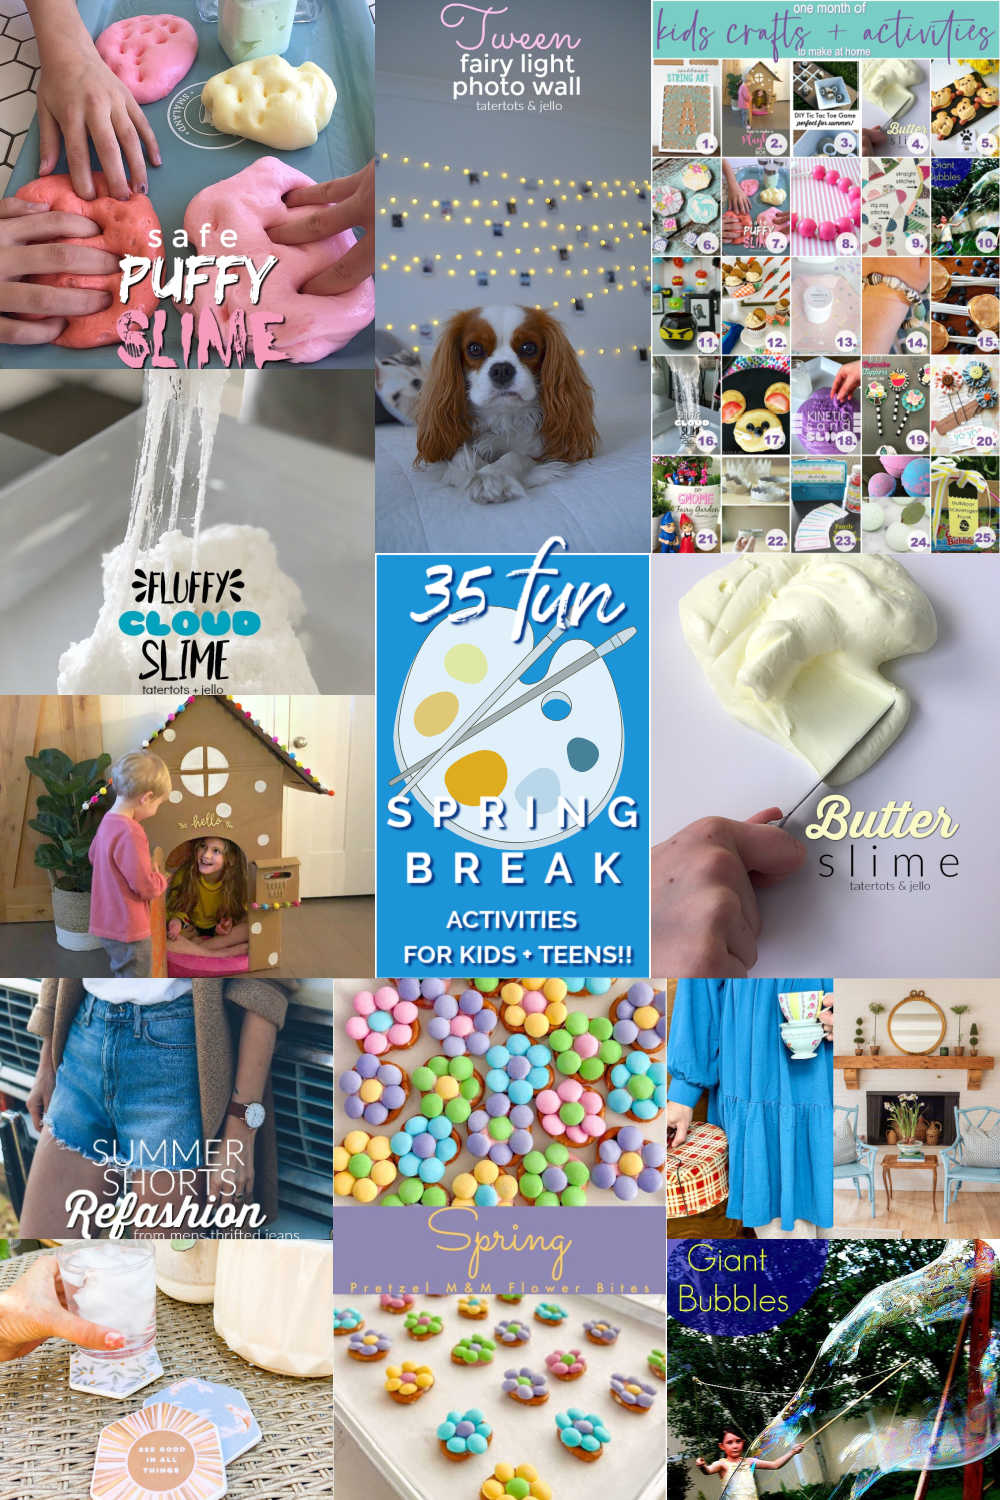 Spring Break Activities for Kids and teens. Discover 35 engaging crafts, recipes, and activities for kids and teens to enjoy during spring break and beyond, offering endless opportunities for creativity and fun.